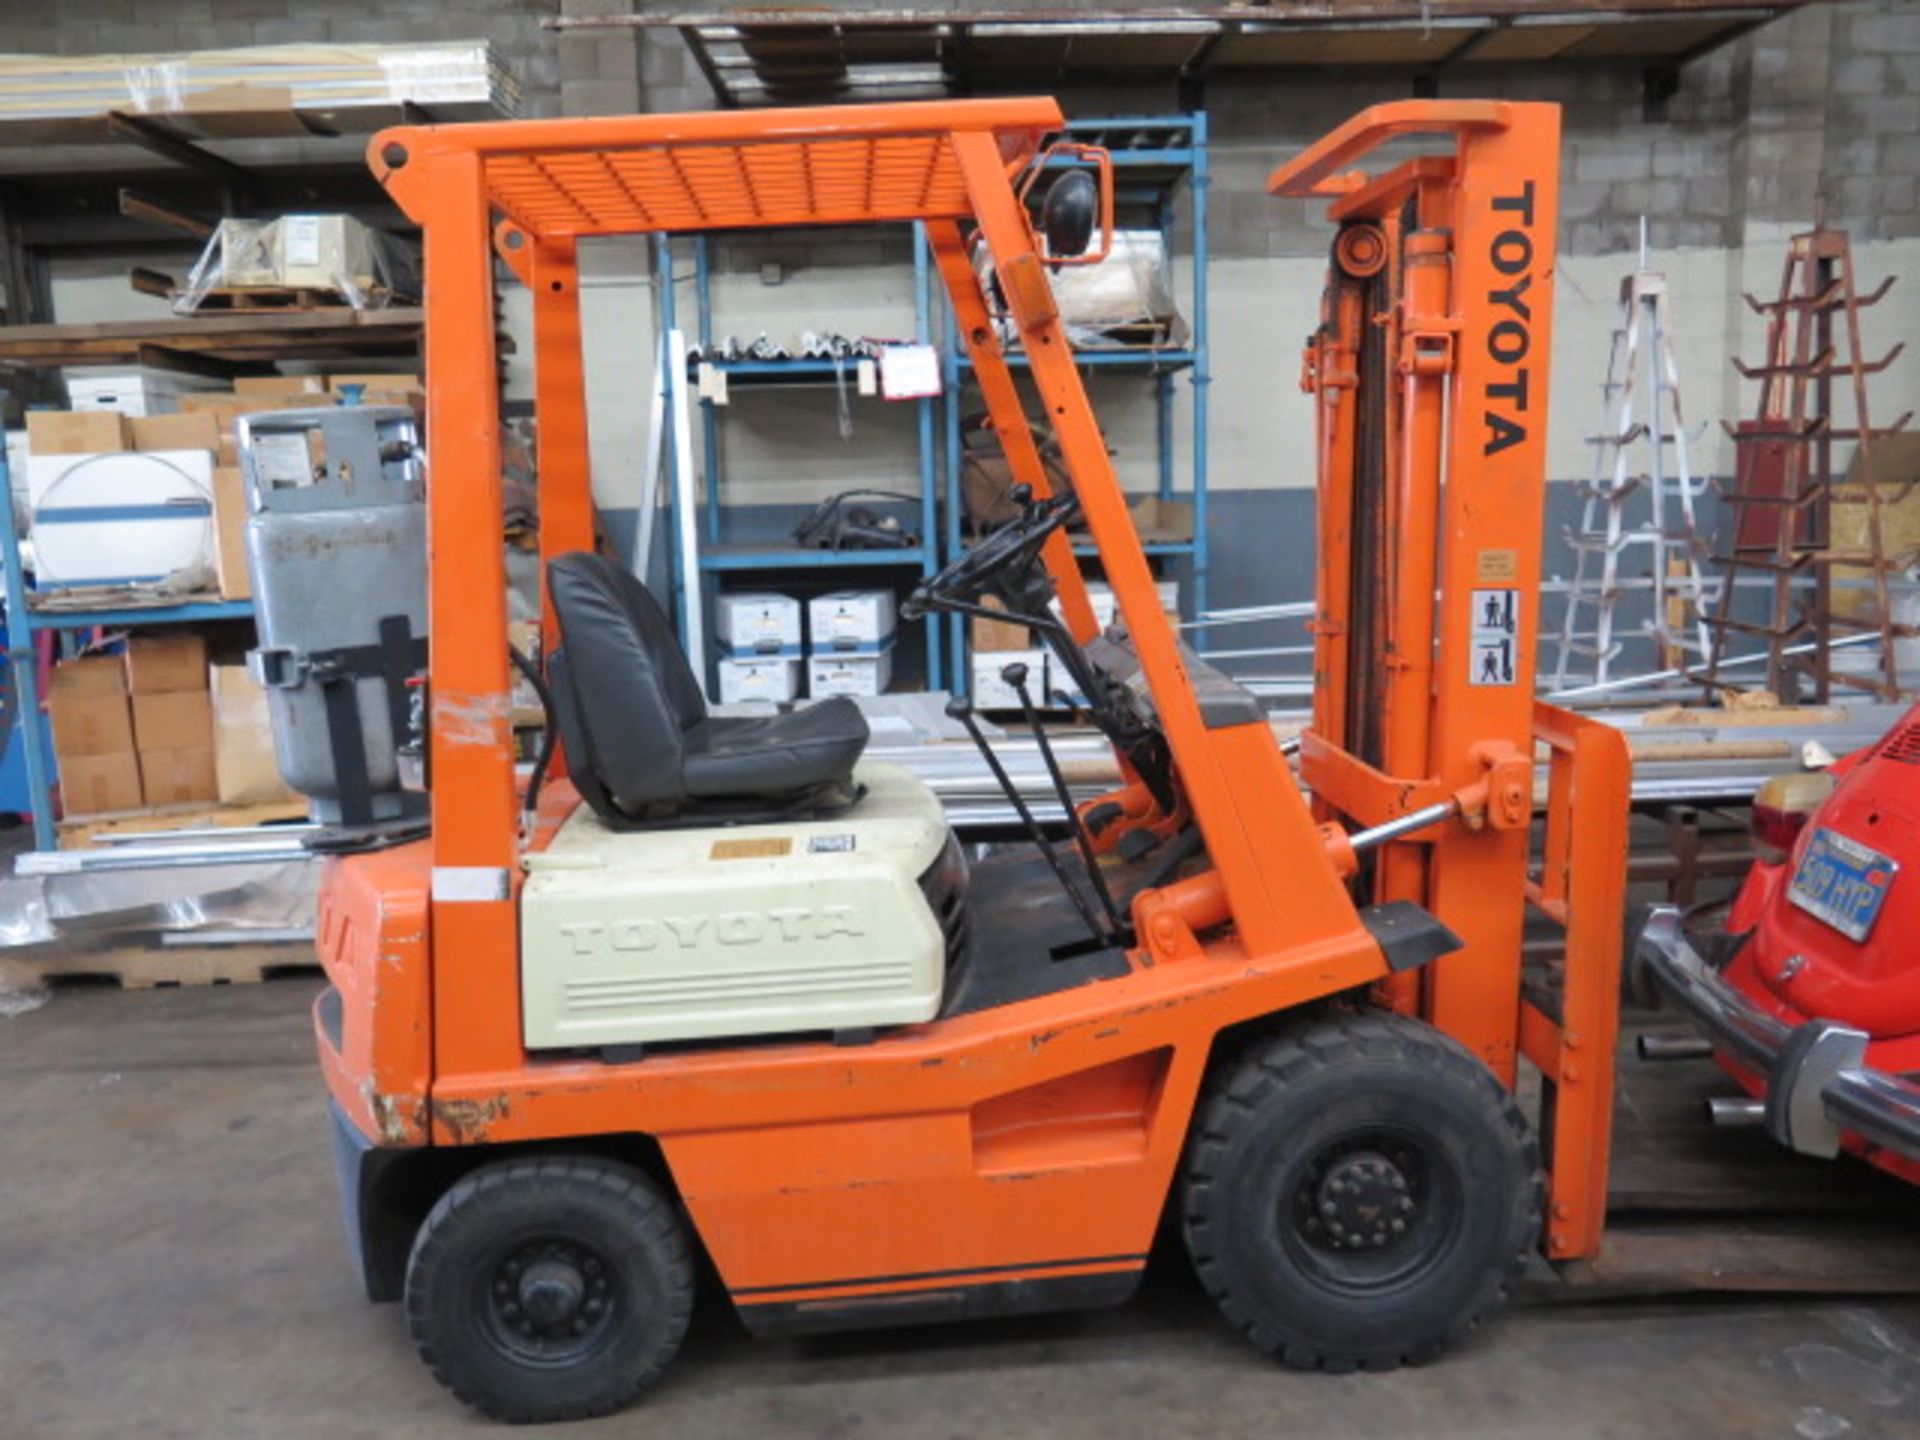 Toyota 4GL14 2500 Lb Cap LPG Forklift w/ 2-Stage Mast, 118” Lift Height, Solid Yard Tires SOLD AS IS